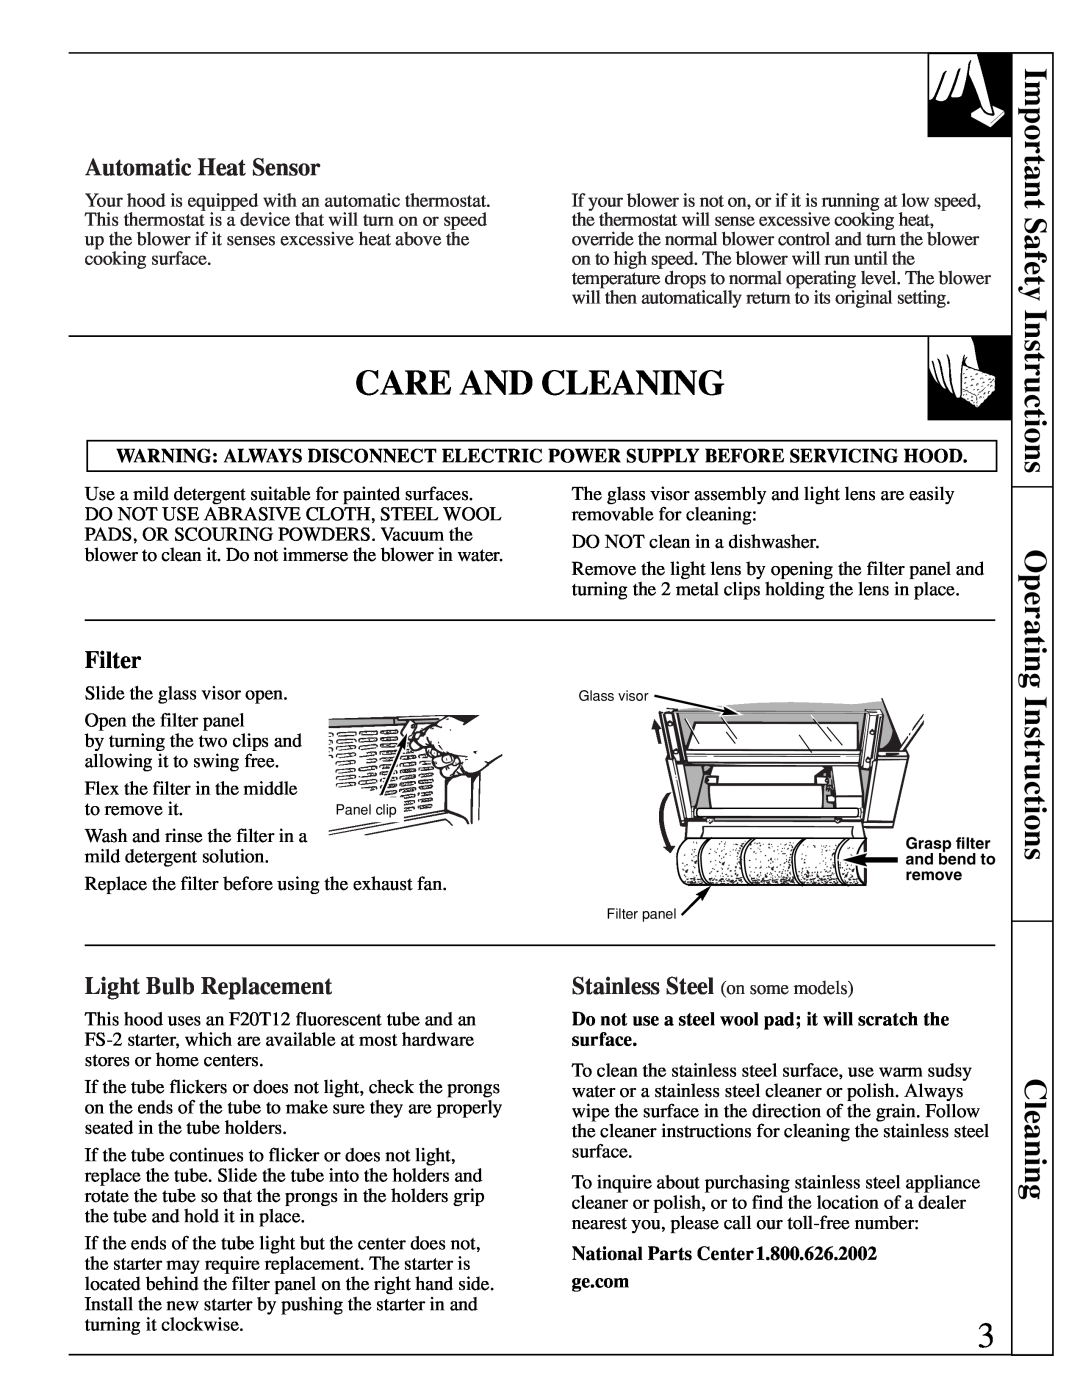 GE JV960, JV696 Care And Cleaning, Important Safety, Instructions, Automatic Heat Sensor, Filter, Light Bulb Replacement 